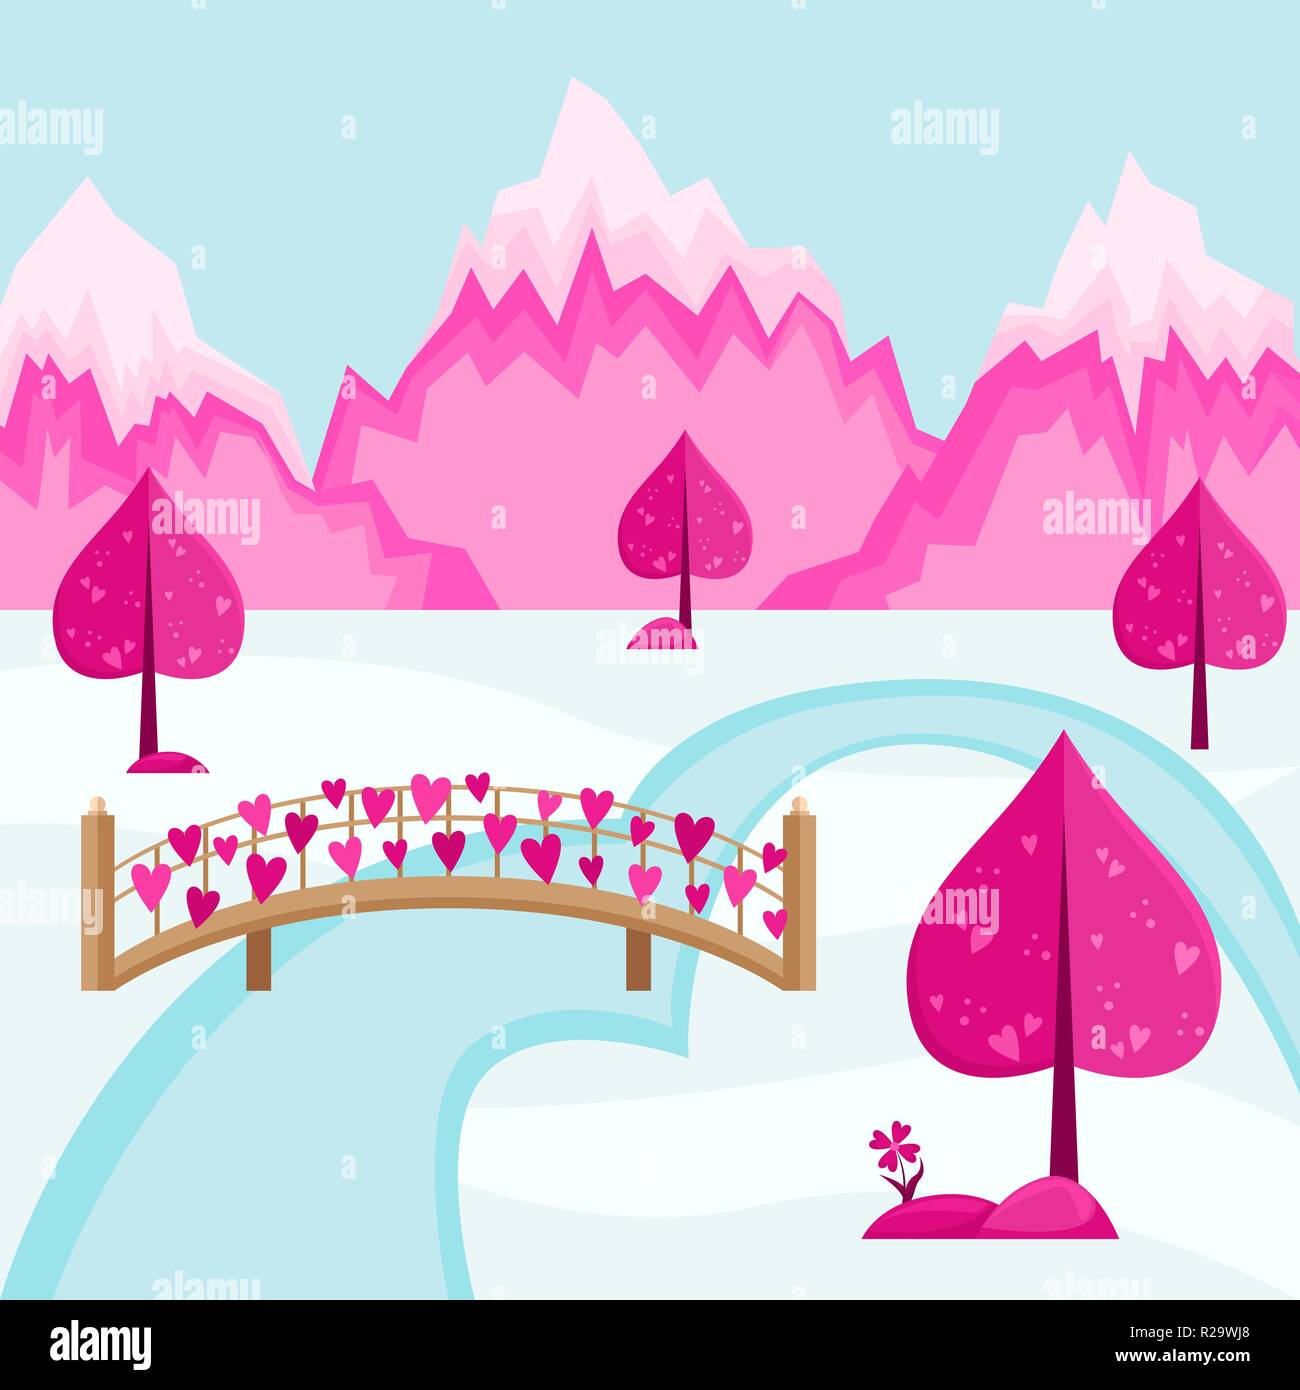 Valentine's day background. Mountain landscape of the village of Love. Bridge hung with hearts Stock Vector